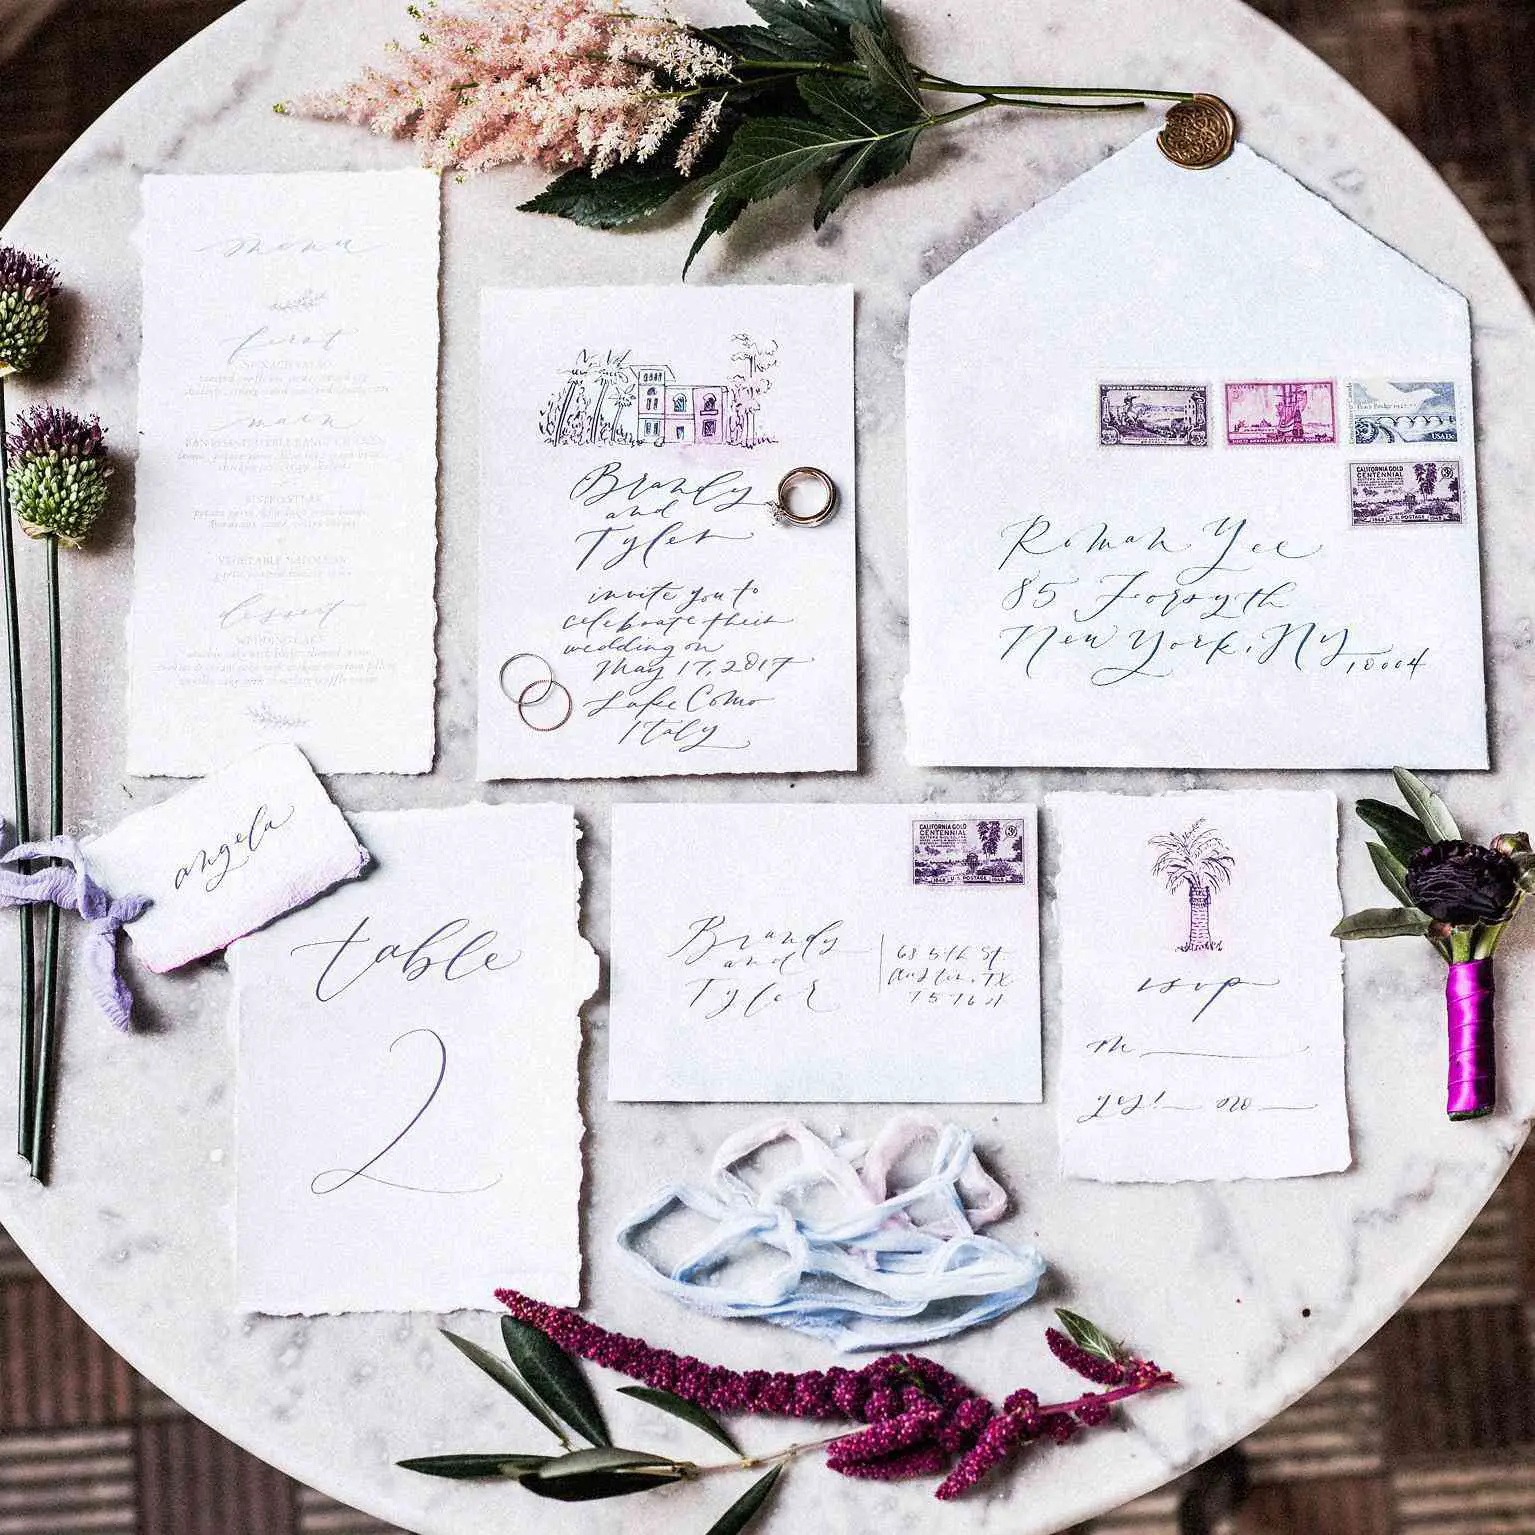 10 Amazing Wedding Invitations Websites to Create Your Own Design